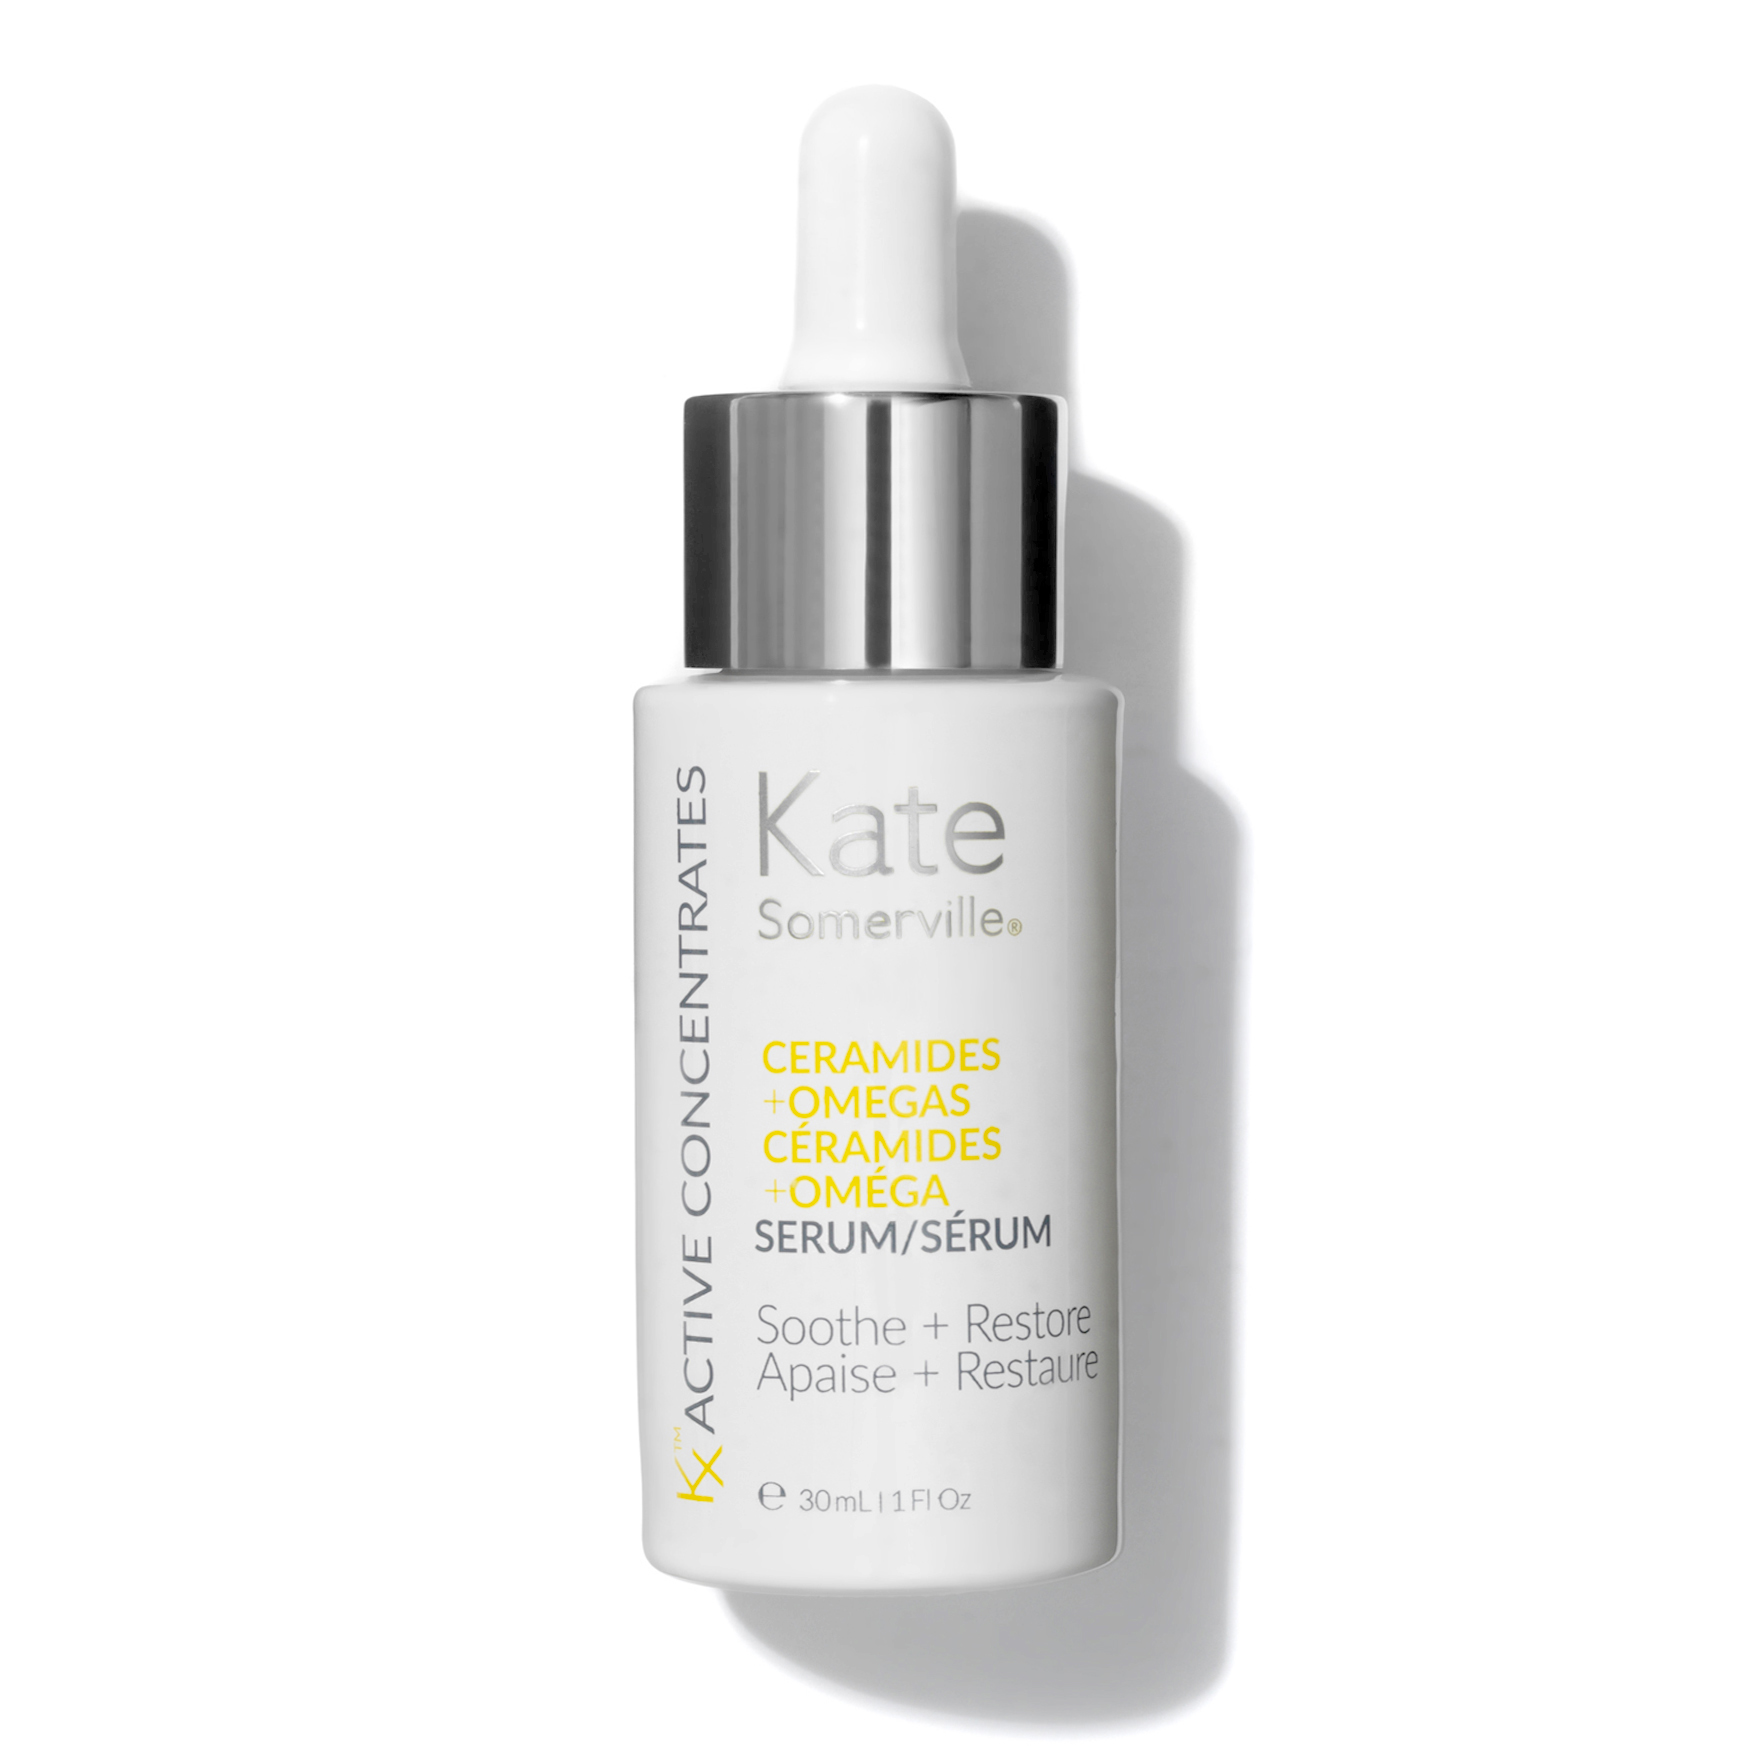 Kate Somerville KX Active Concentrates Omegas + Ceramides Barrier Serum | Space NK